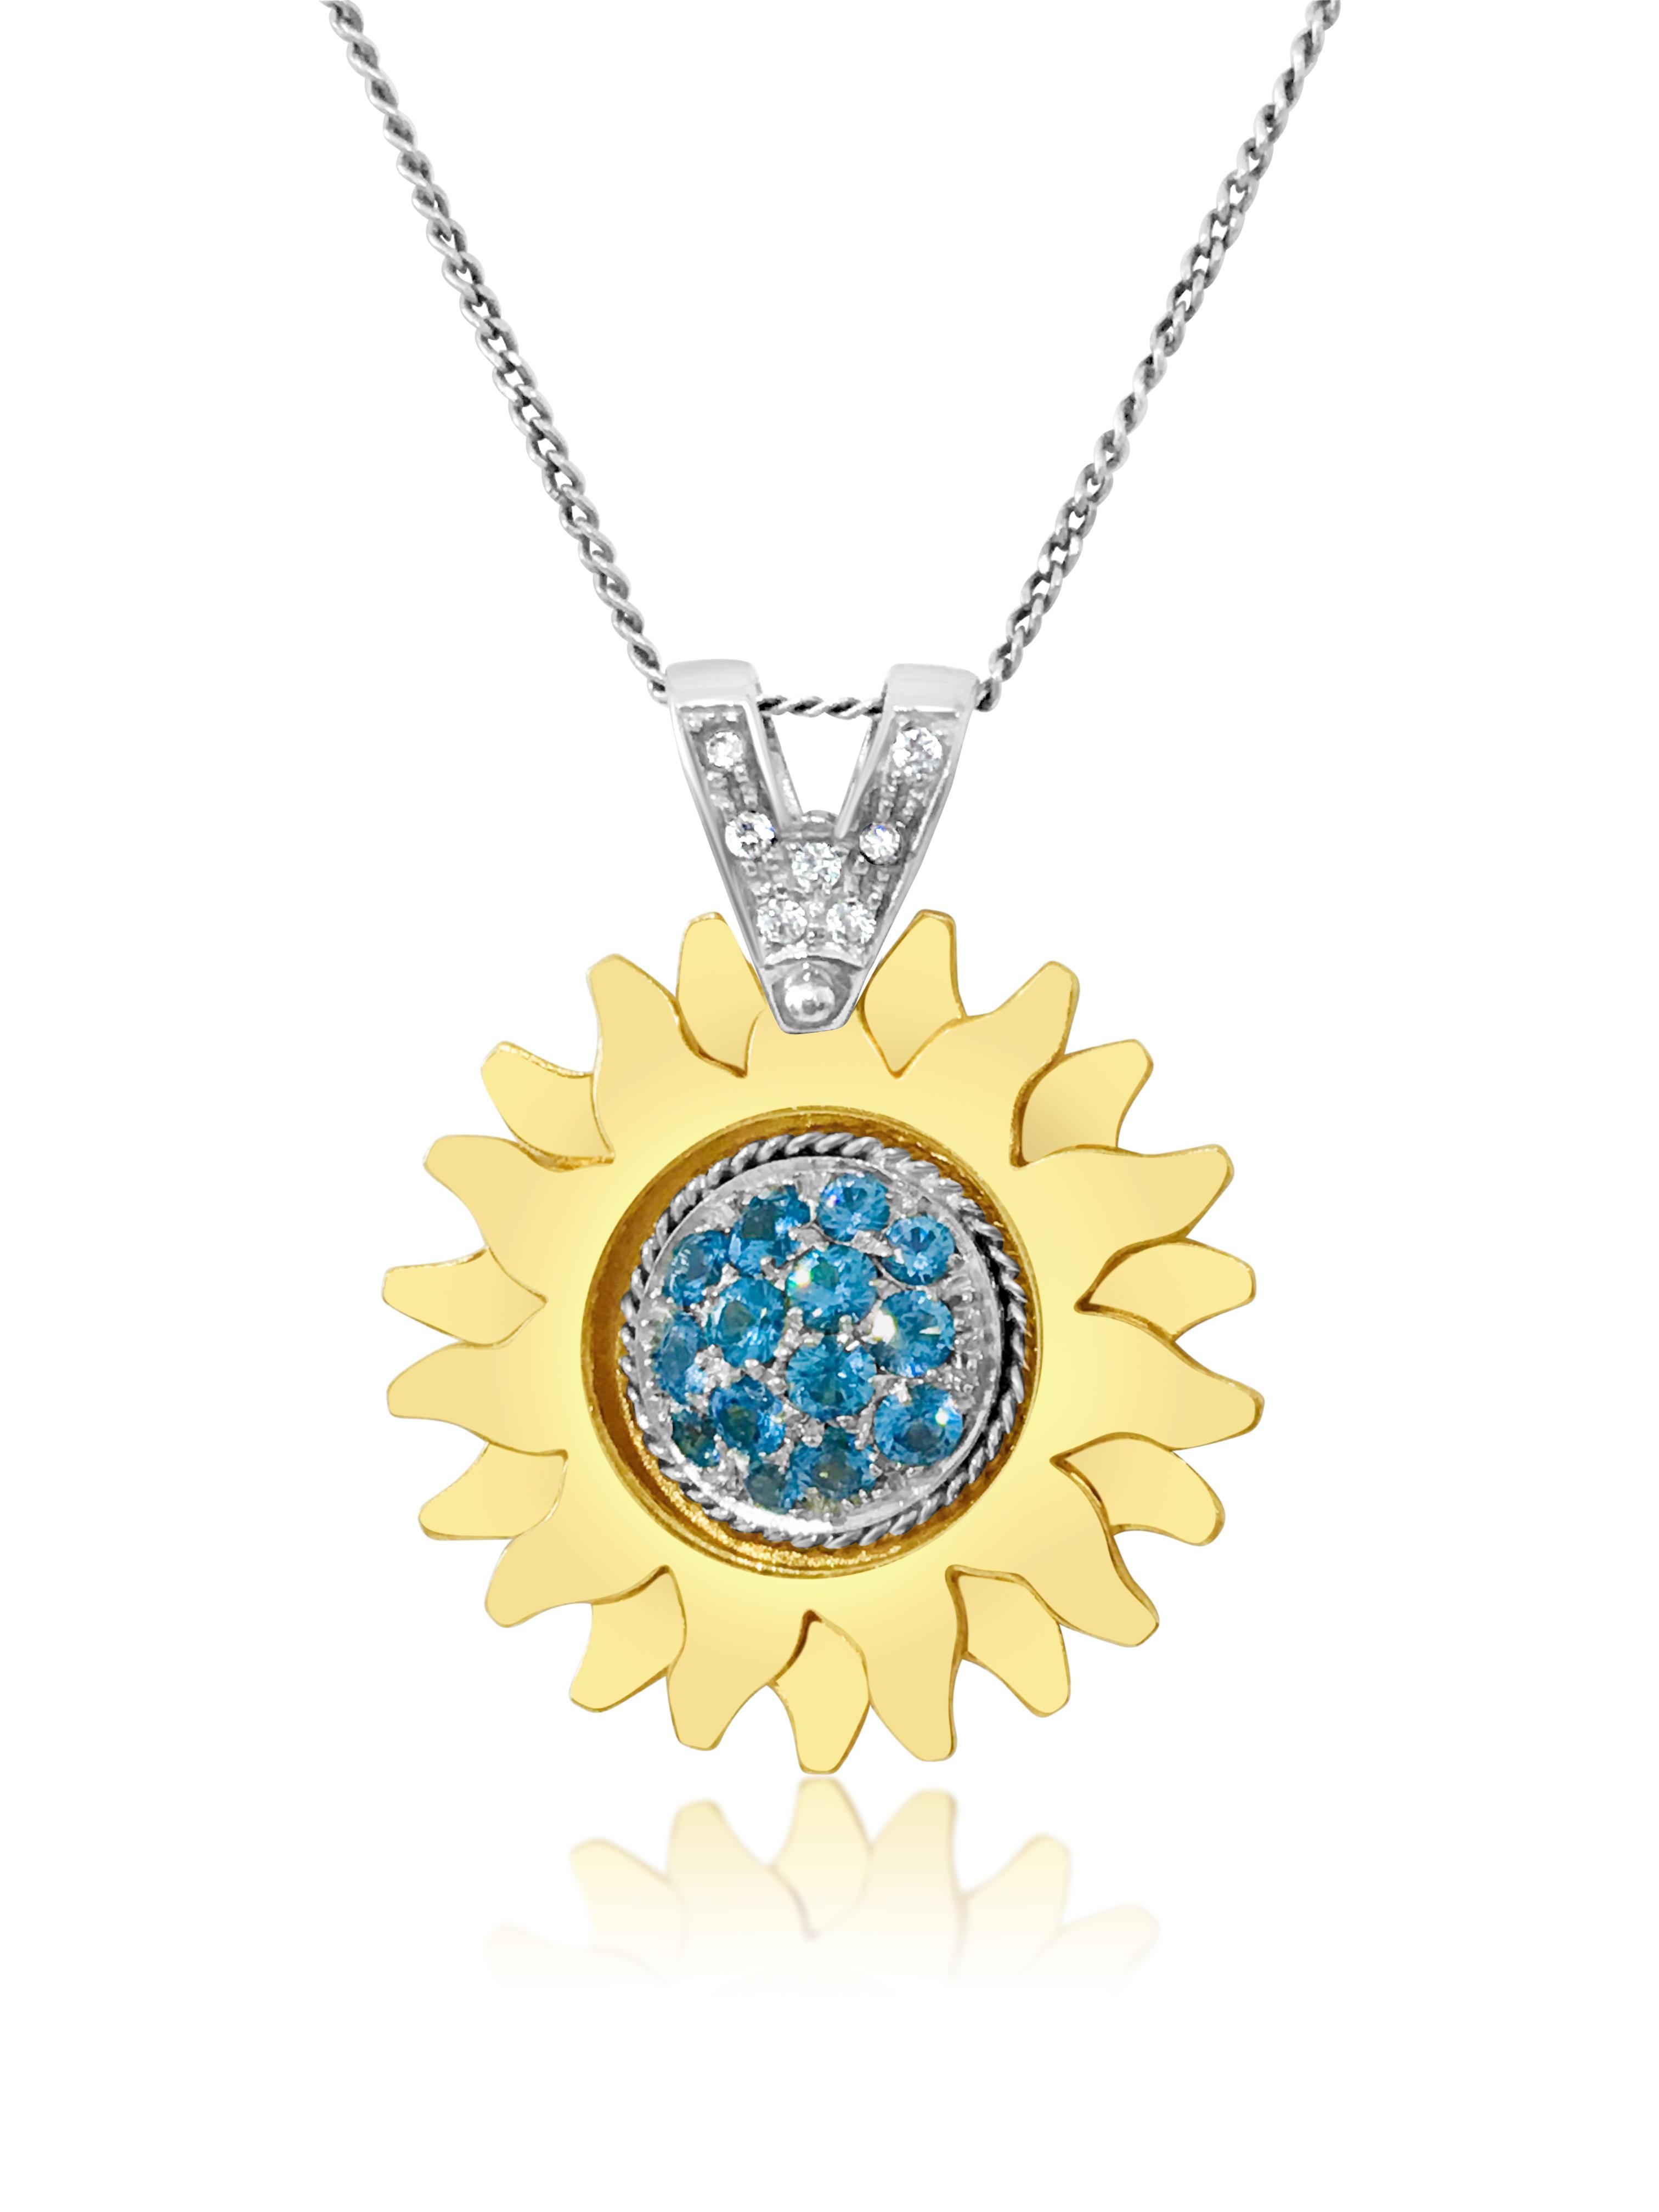 Metal: 18K yellow gold and white gold (two tone). 
1.50 carat blue topaz. 0.14 carat diamonds, VS clarity and G color. 
Total carat weight of all gemstones: 1.64 carats. Double stack sun design metal with gorgeous blue topaz set perfectly on it.